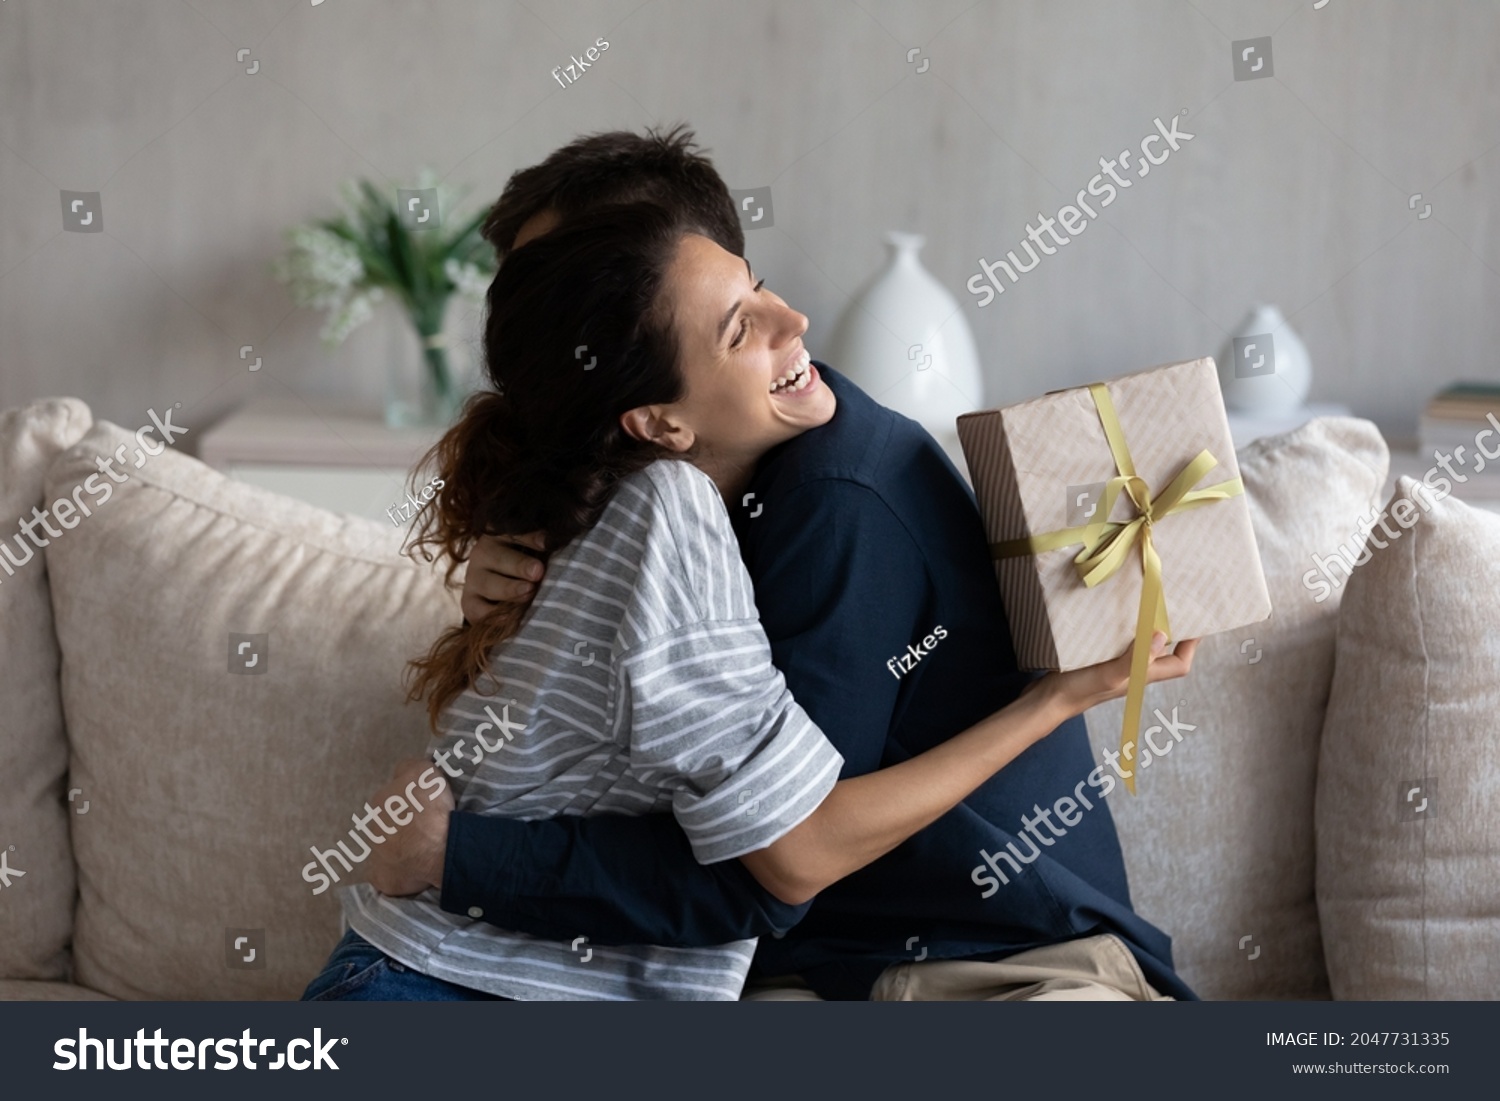 Happy young 30s latina woman embracing loving husband, feeling thankful for getting present in wrapped gift box, celebrating happy birthday or marriage anniversary, international women s day. #2047731335